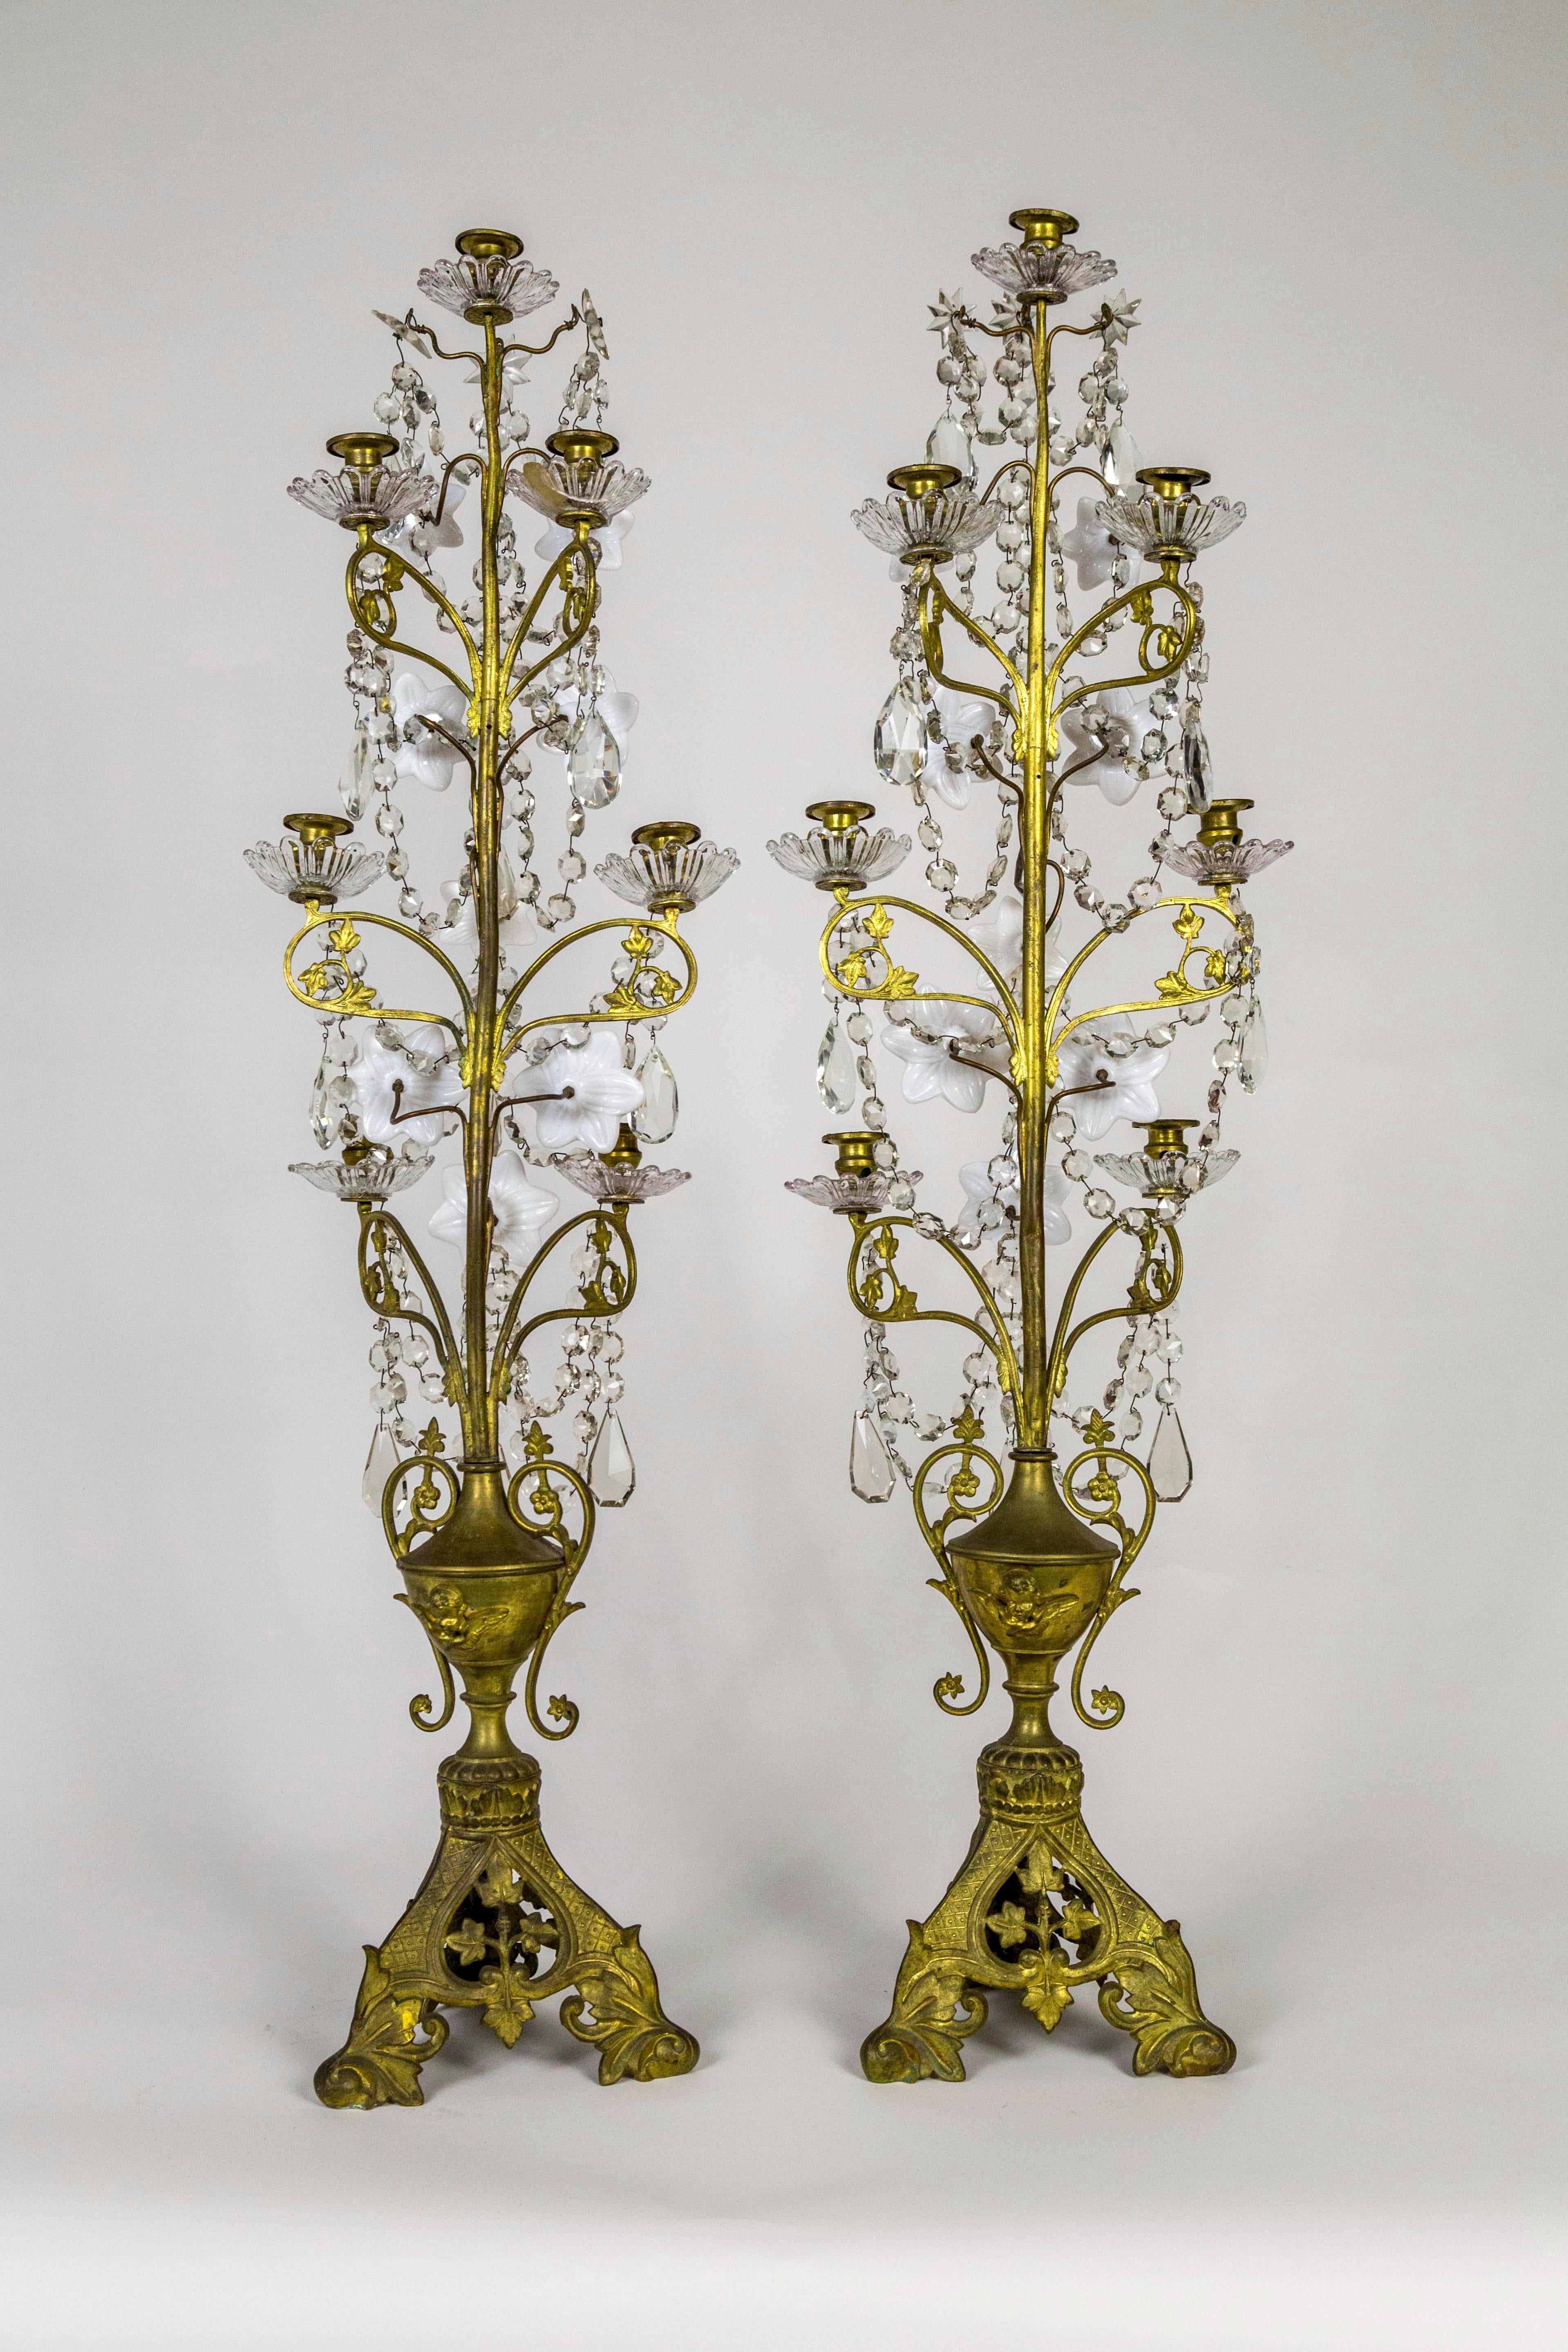 North American Tall 7-Candle Girandole with Crystals and Milk Glass Flowers, 'Pair'